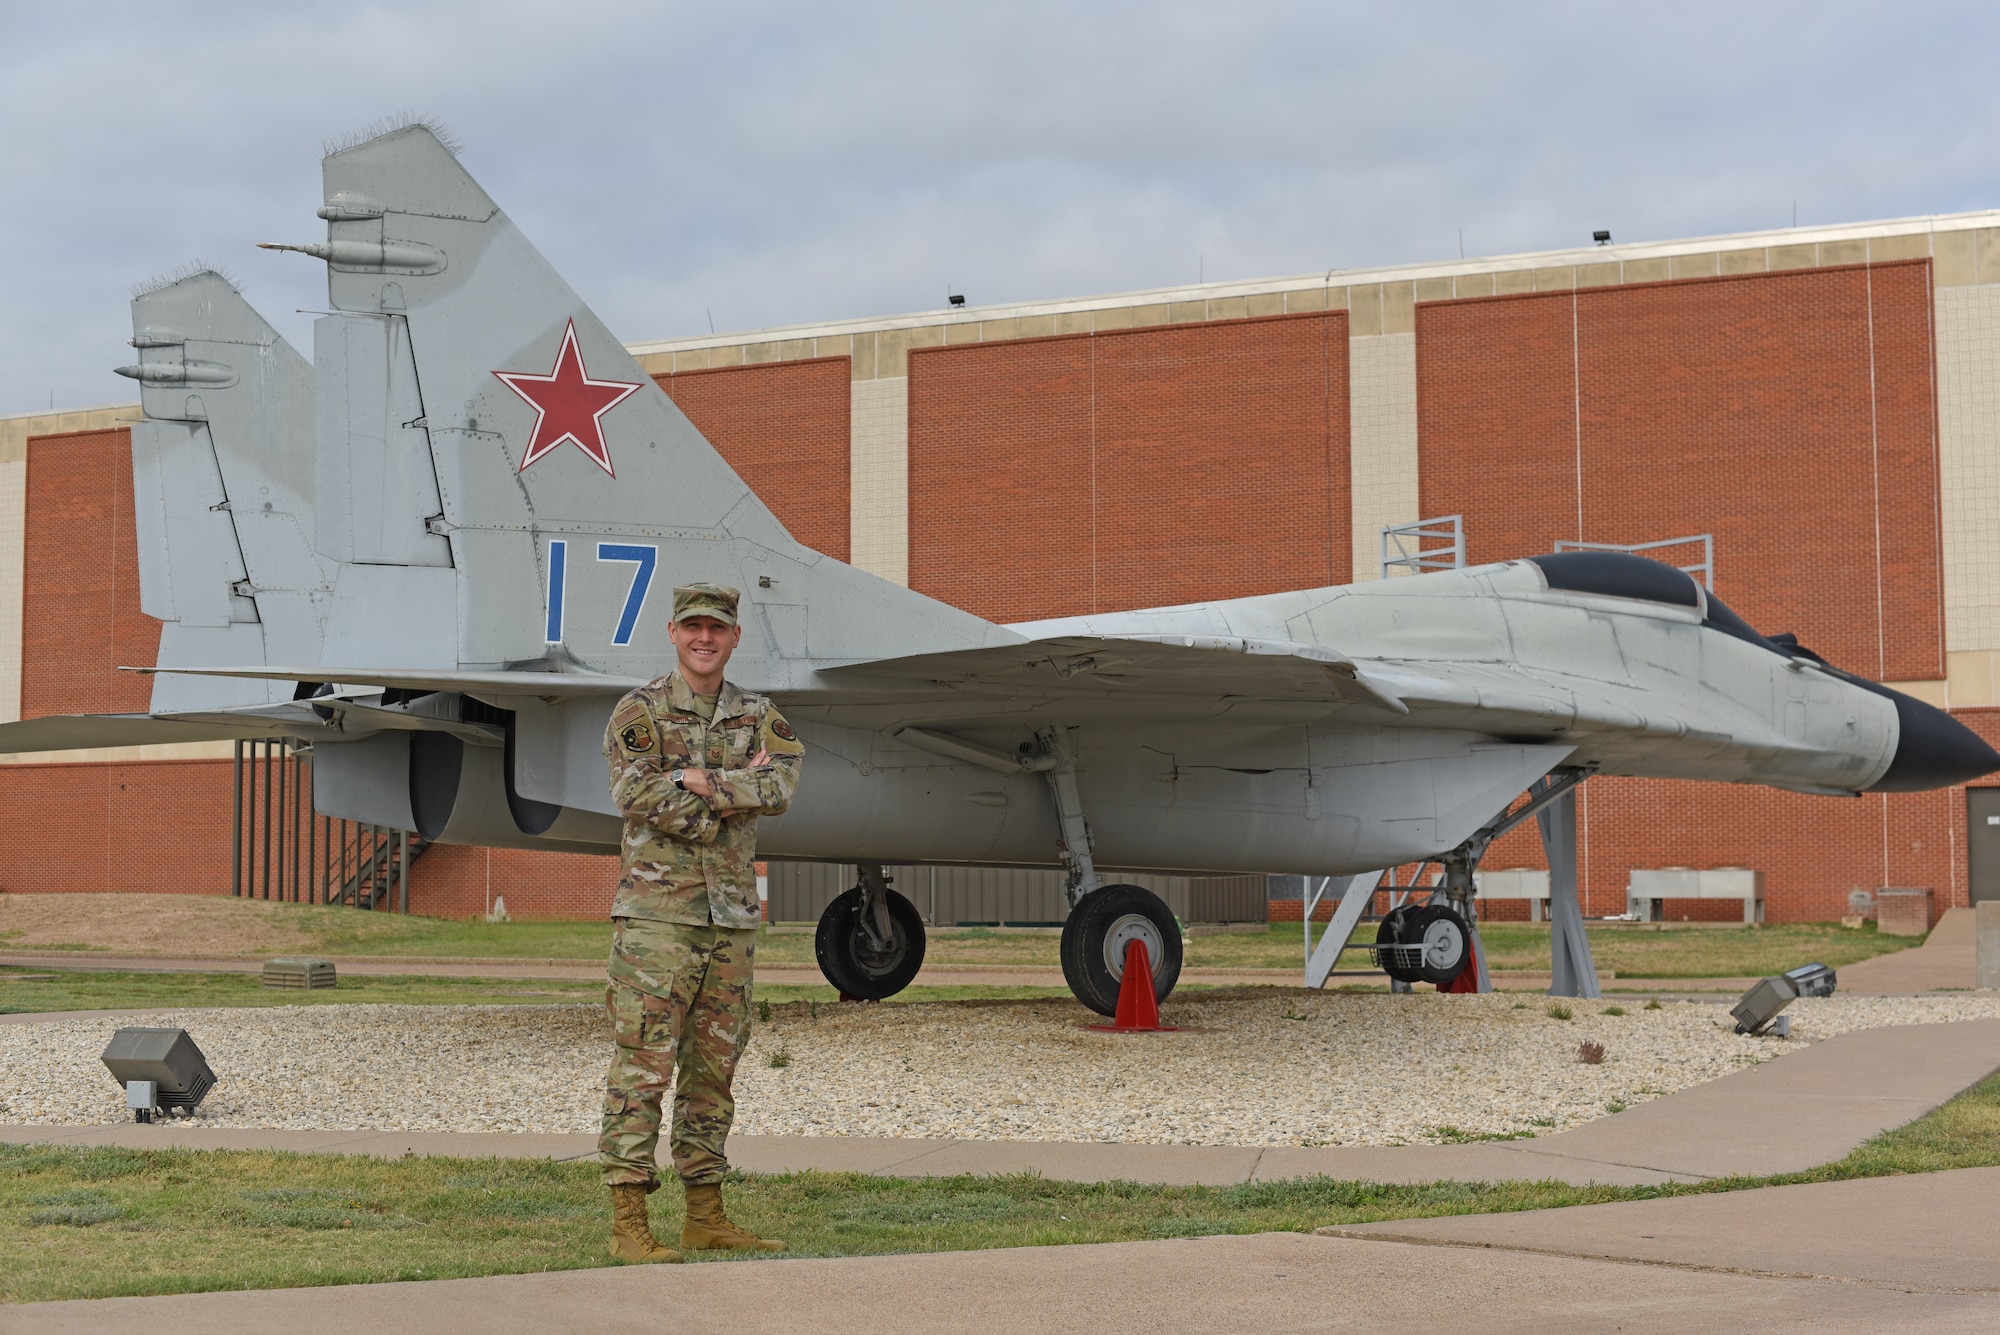 U.S. Air Force Tech. Sgt. Dylan Hudson, 316th Training Squadron apprentice signals collection course noncommissioned officer in charge, poses for a photo at the MiG-29 static display, Goodfellow Air Force Base, Texas, June 27, 2022. The MiG-29 is a Soviet era twin-engine fighter aircraft and is used as a static display to enhance training on base. (U.S. Air Force photo Airman 1st Class Zachary Heimbuch